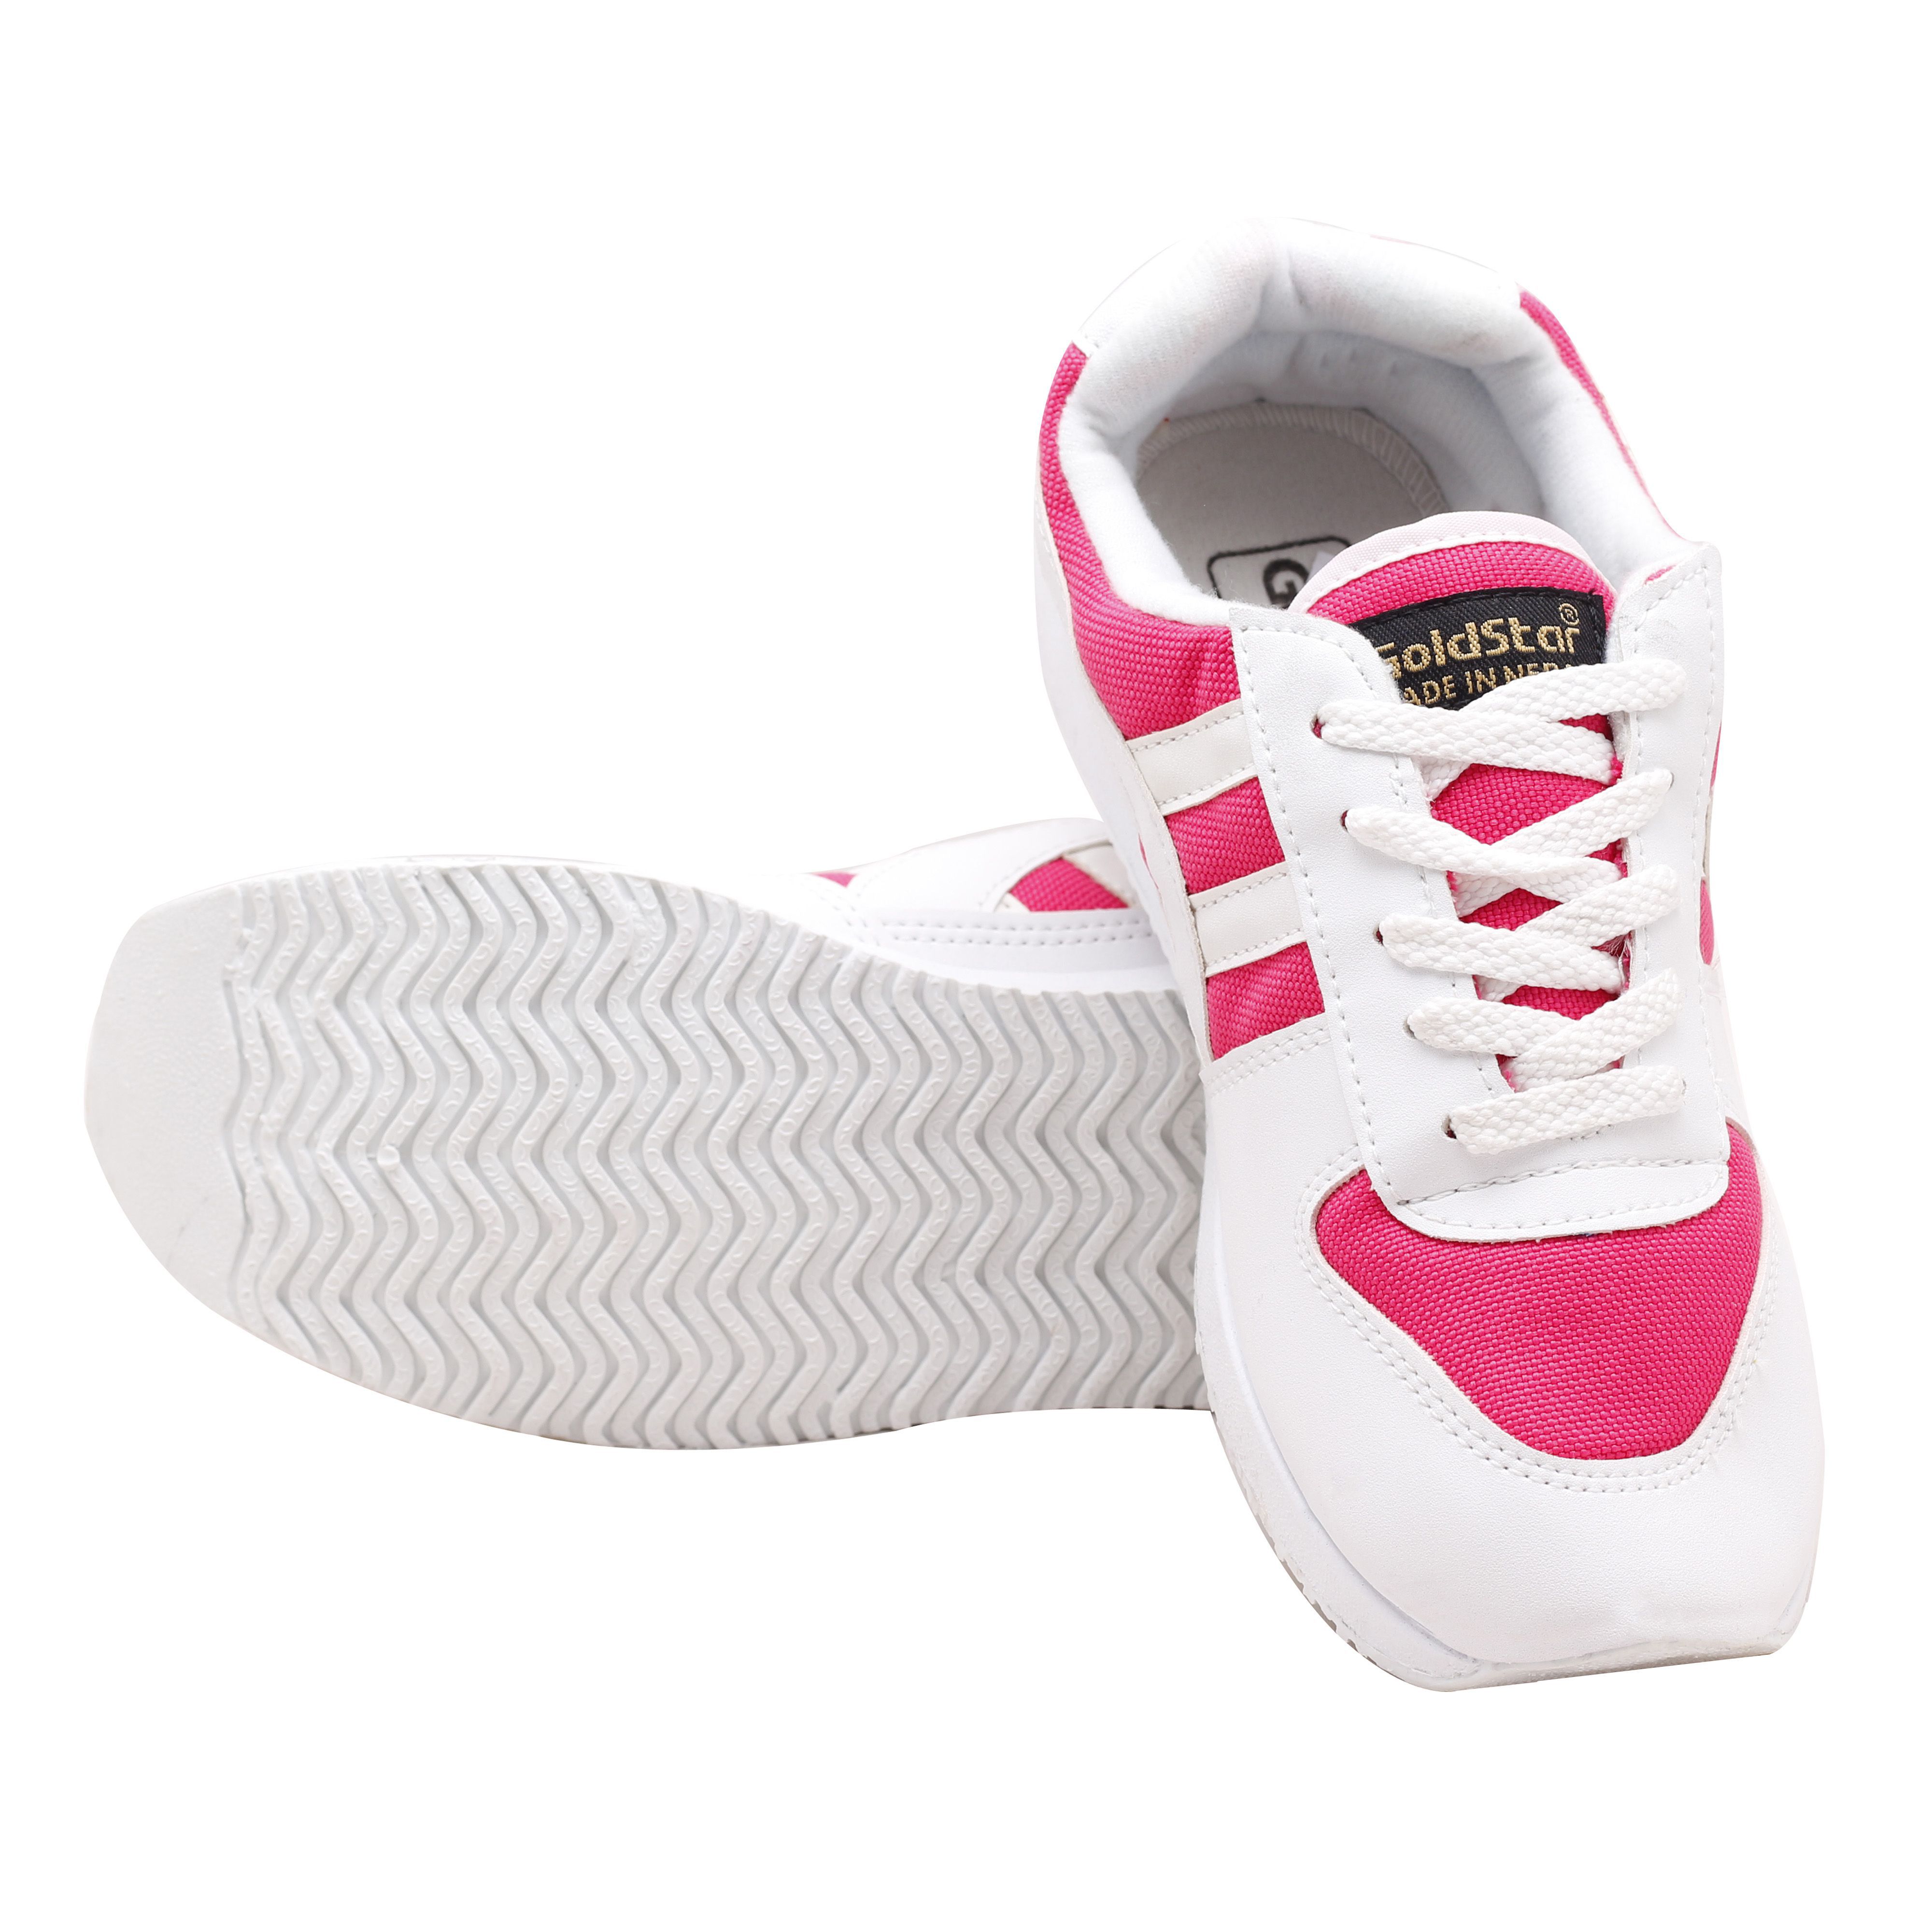 GOLDSTAR White Running Shoes Price in India- Buy GOLDSTAR White Running ...